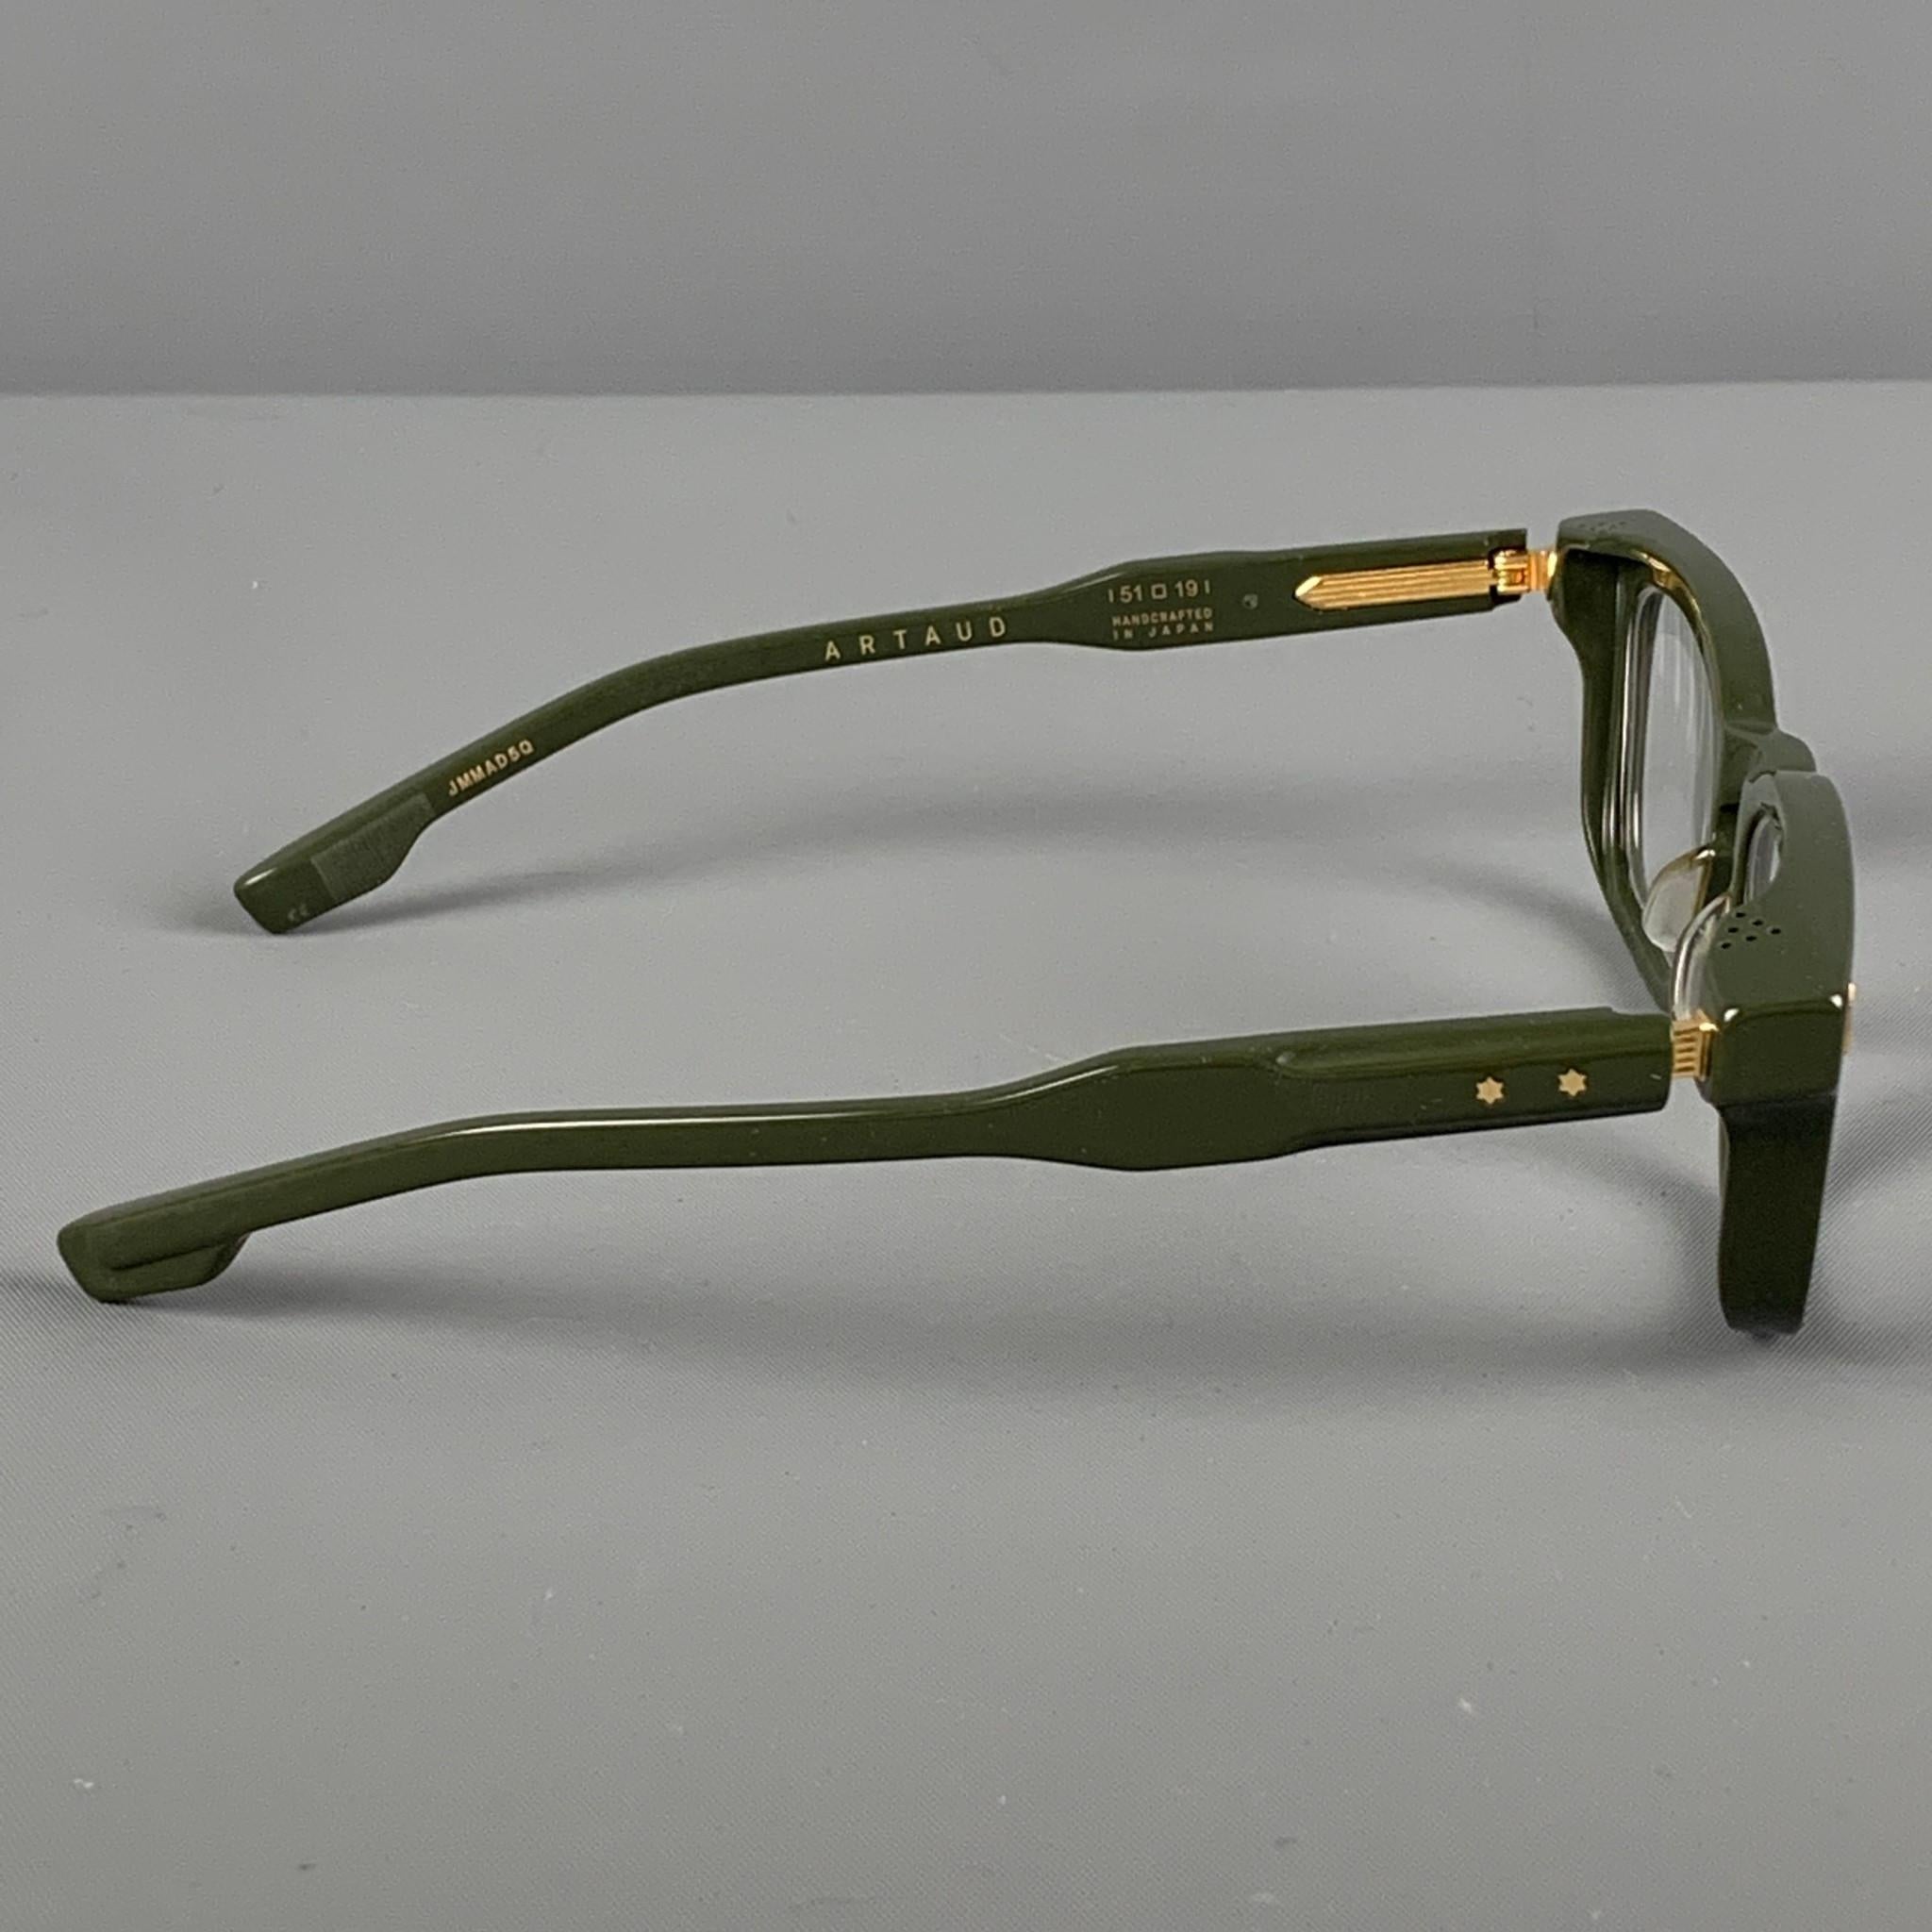 JACQUES MARIE MAGE 'Artaud' Limited Edition frames comes in a green acetate featuring gold tone accents and custom optical lenses. Includes box & case. Handcrafted in Japan.

New Without Tags. 
Marked: JMMAD5Q 51-19
Original Retail Price: